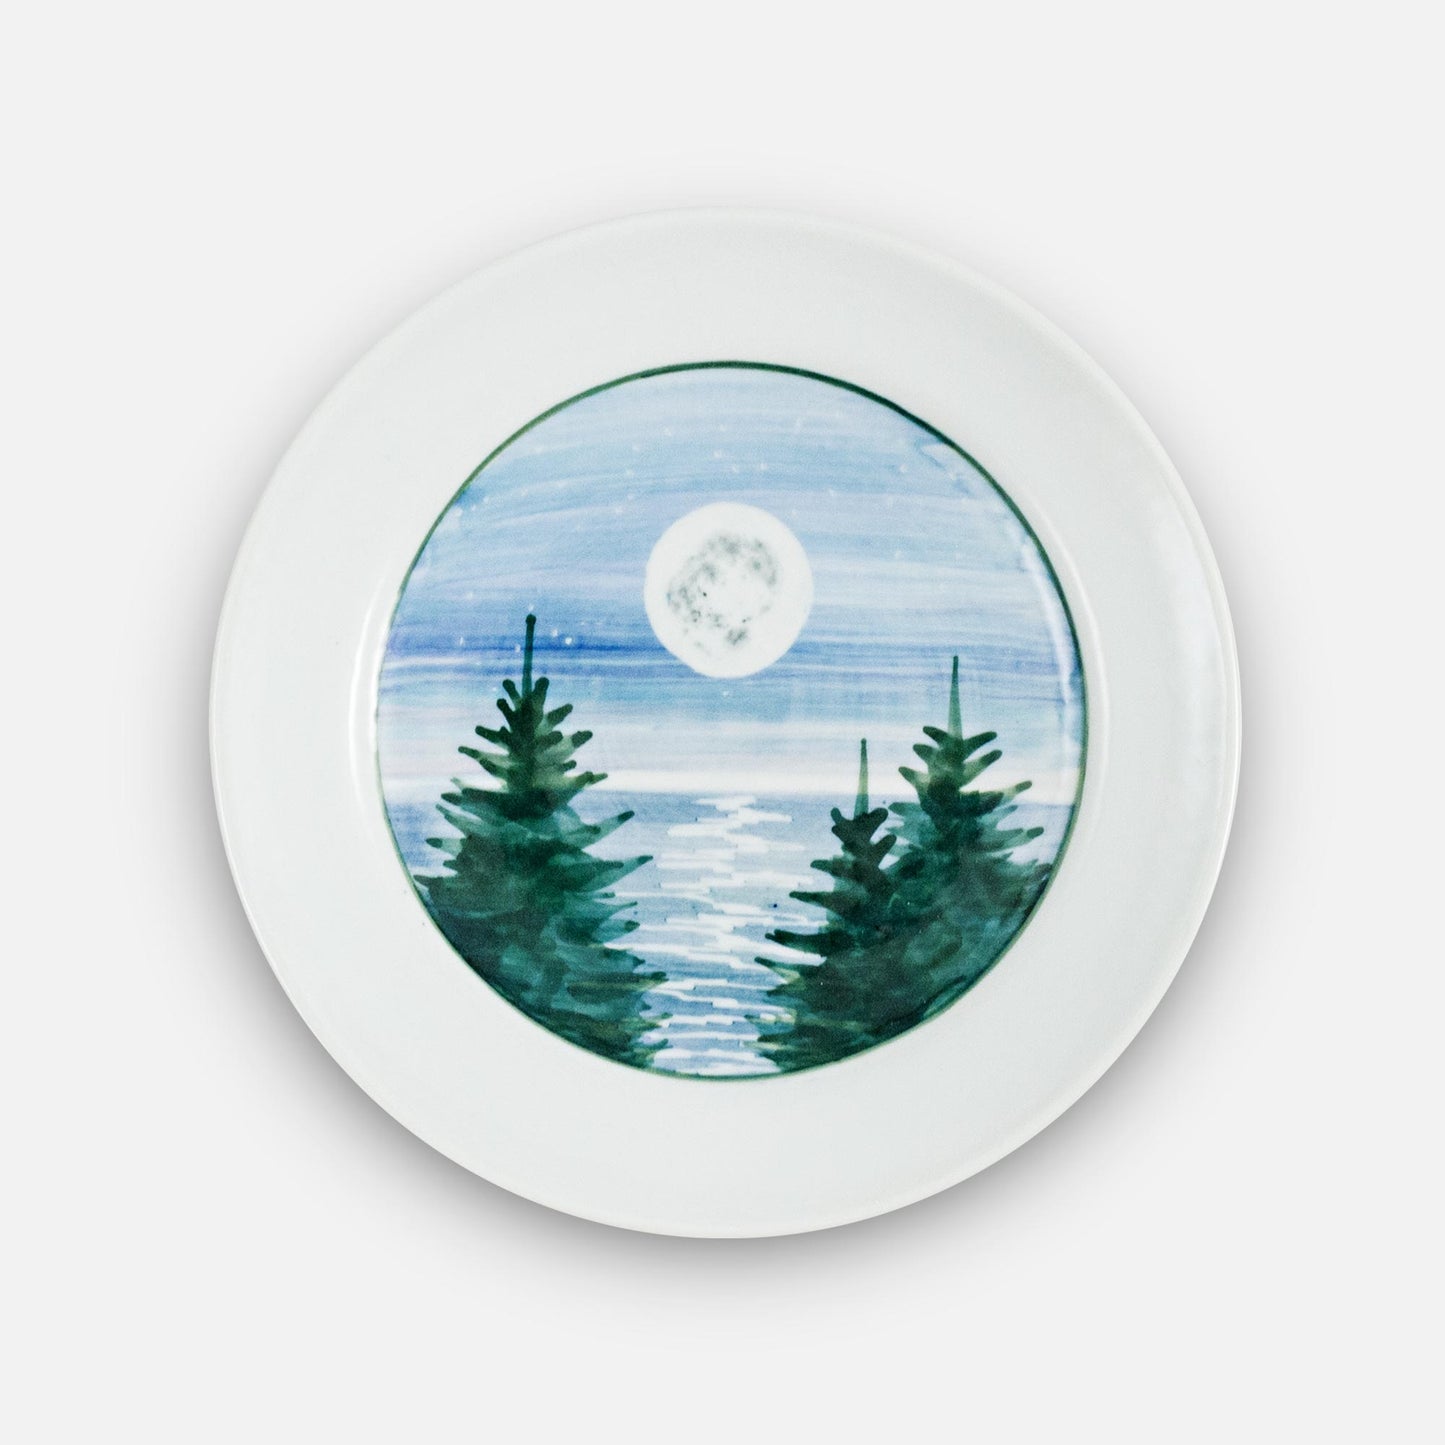 Handmade Pottery Rimless Dinner Plate made by Georgetown Pottery in Maine in Moon Pattern